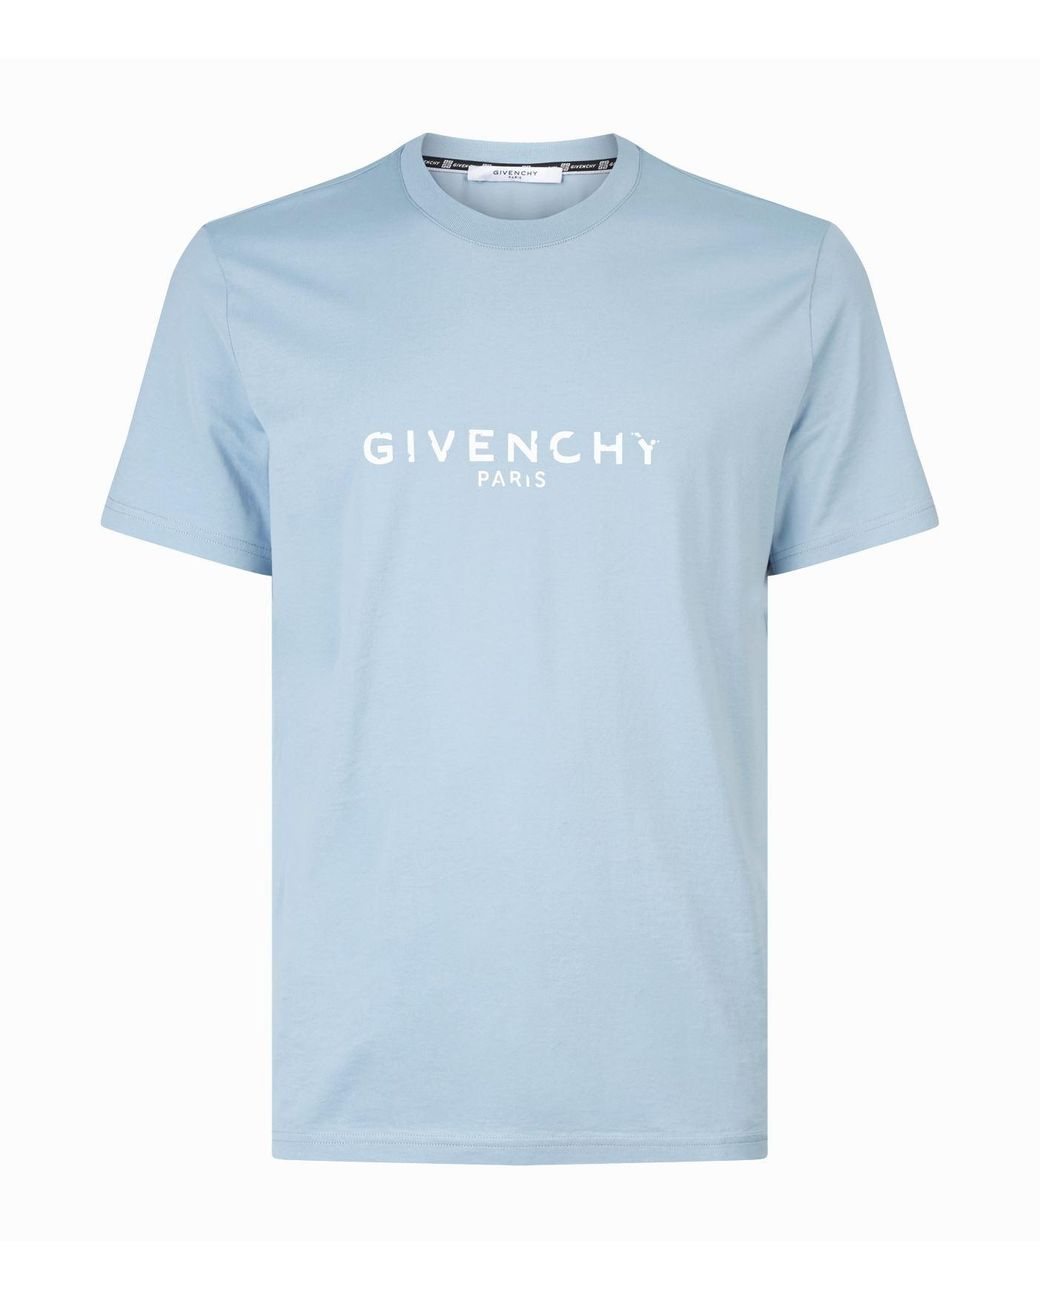 Givenchy Contrast Logo T-shirt in Blue for Men - Lyst